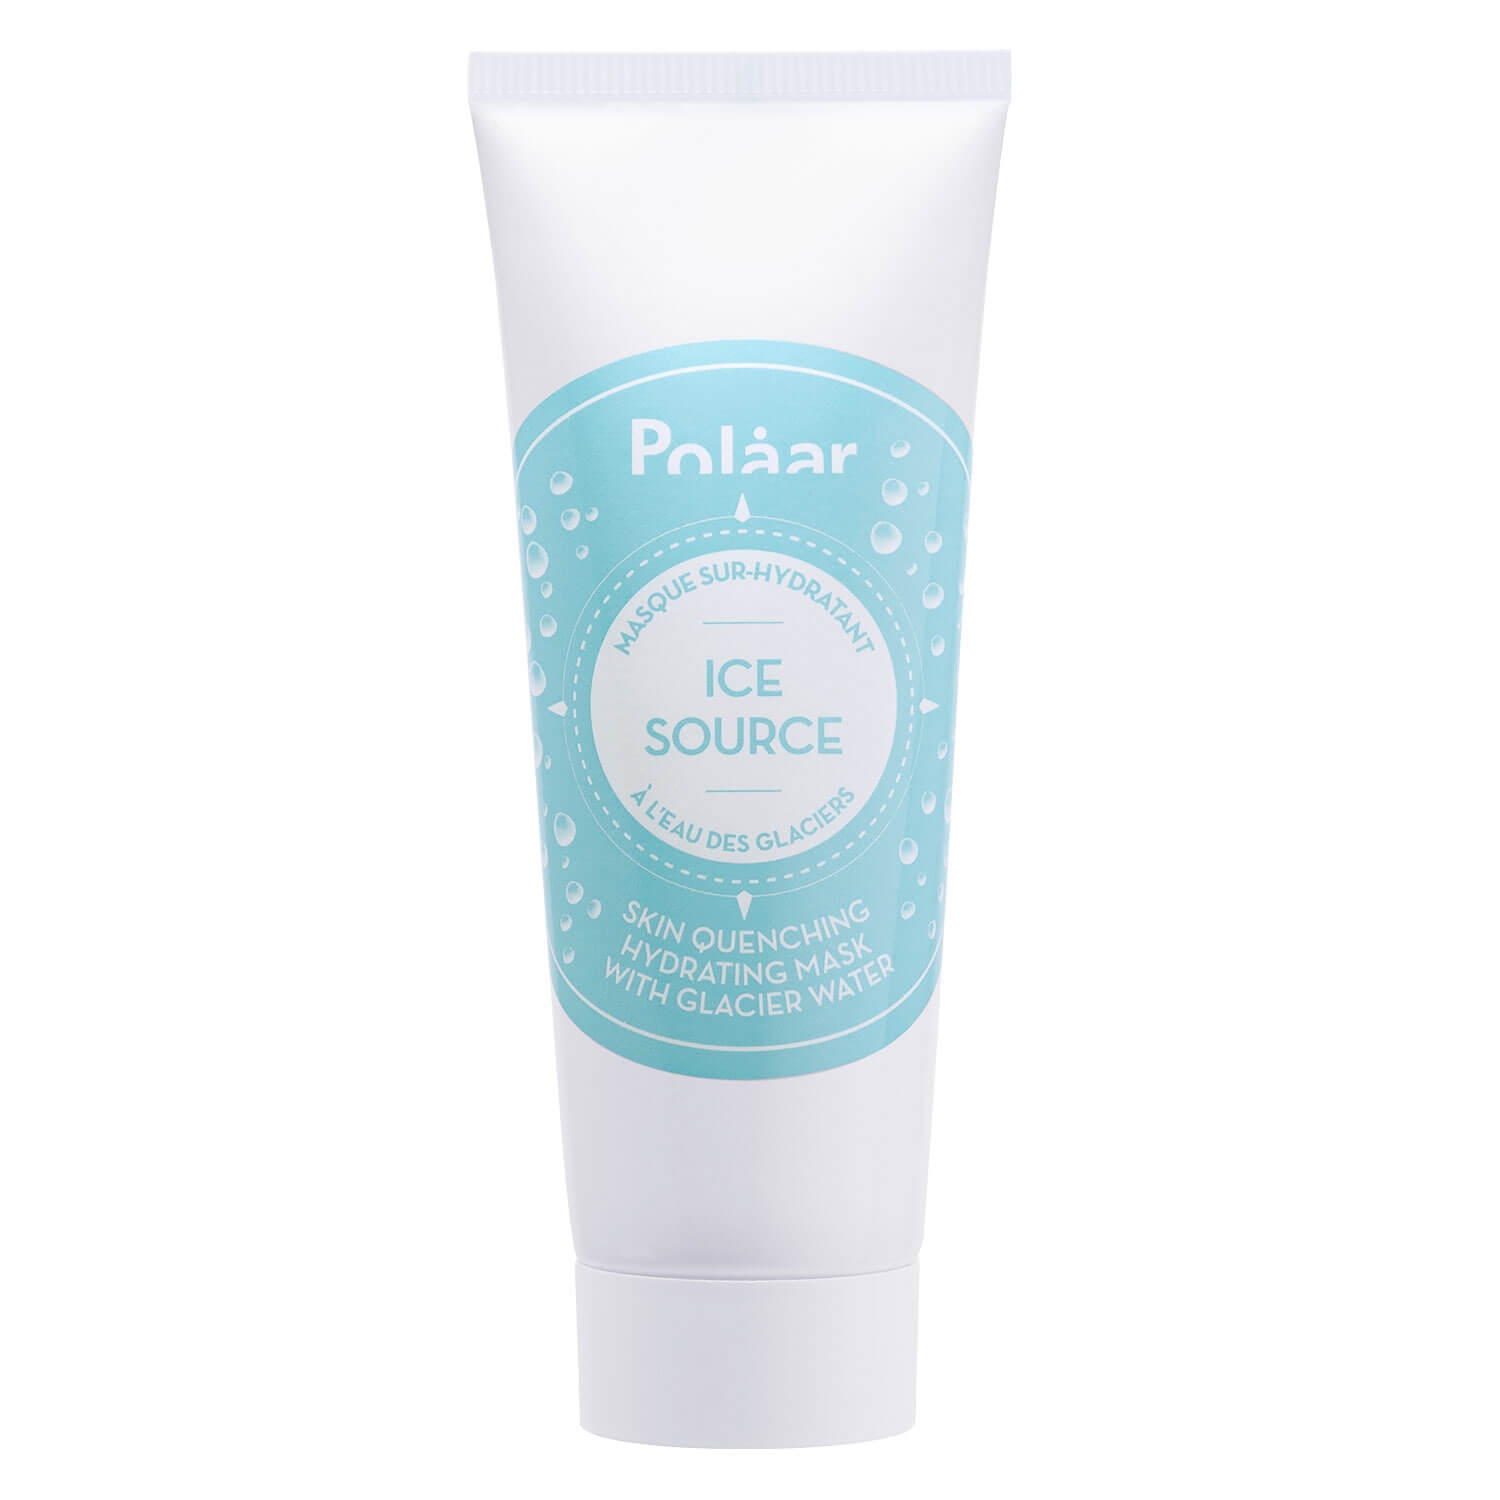 Product image from Polaar - Ice Source Skin Quenching Hydrating Mask